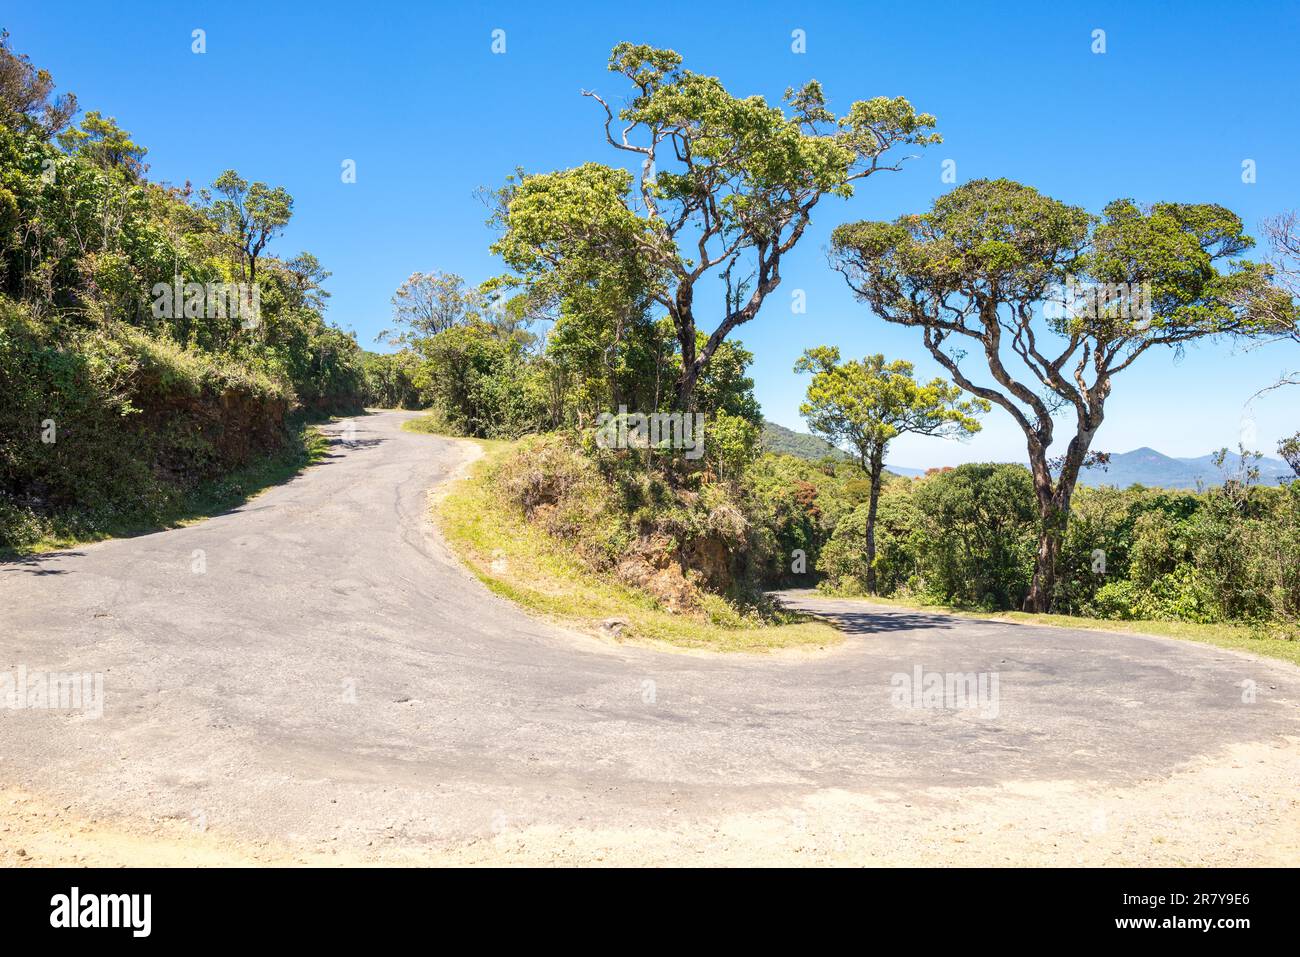 The worlds end road. The highway b512 goes up by serpentine to the Horton Plains in the Central province of Sri Lanka Stock Photo